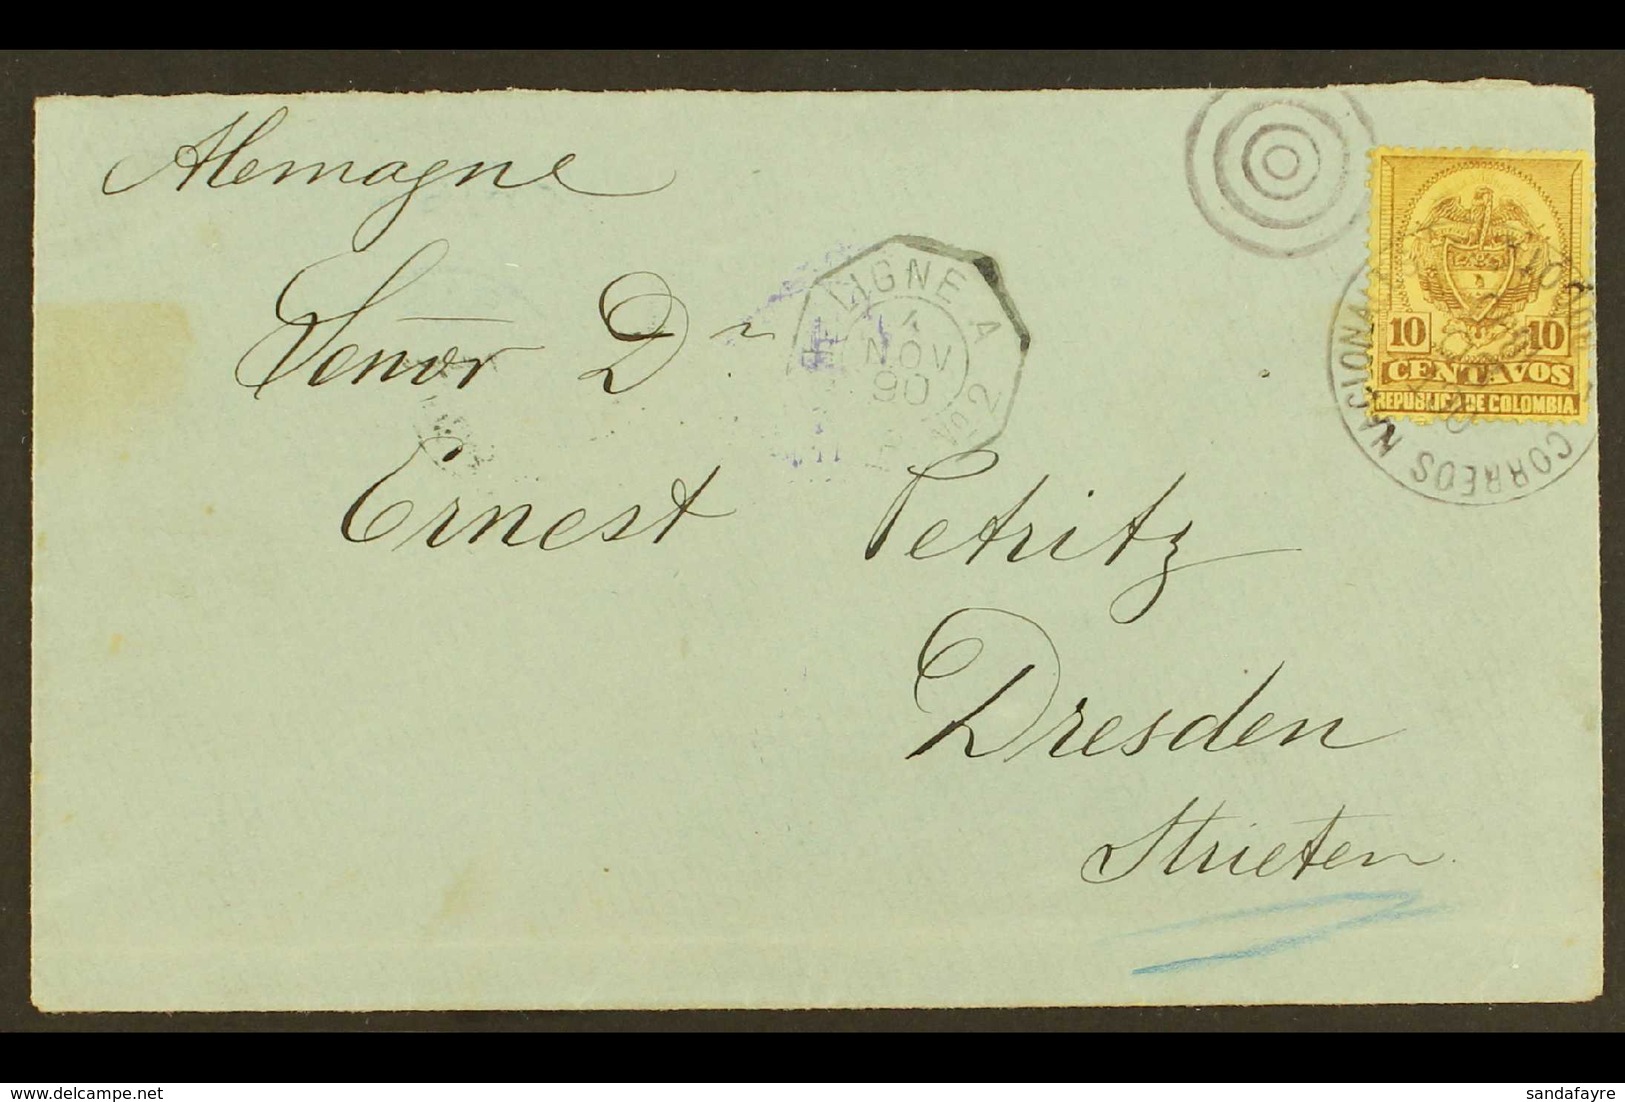 1890 COVER TO GERMANY Bearing 1890-91 10c Brown On Yellow Tied By Fine "CORREOS NACIONALES BOGOTA / OTT 20, 1890"  Cds C - Colombia